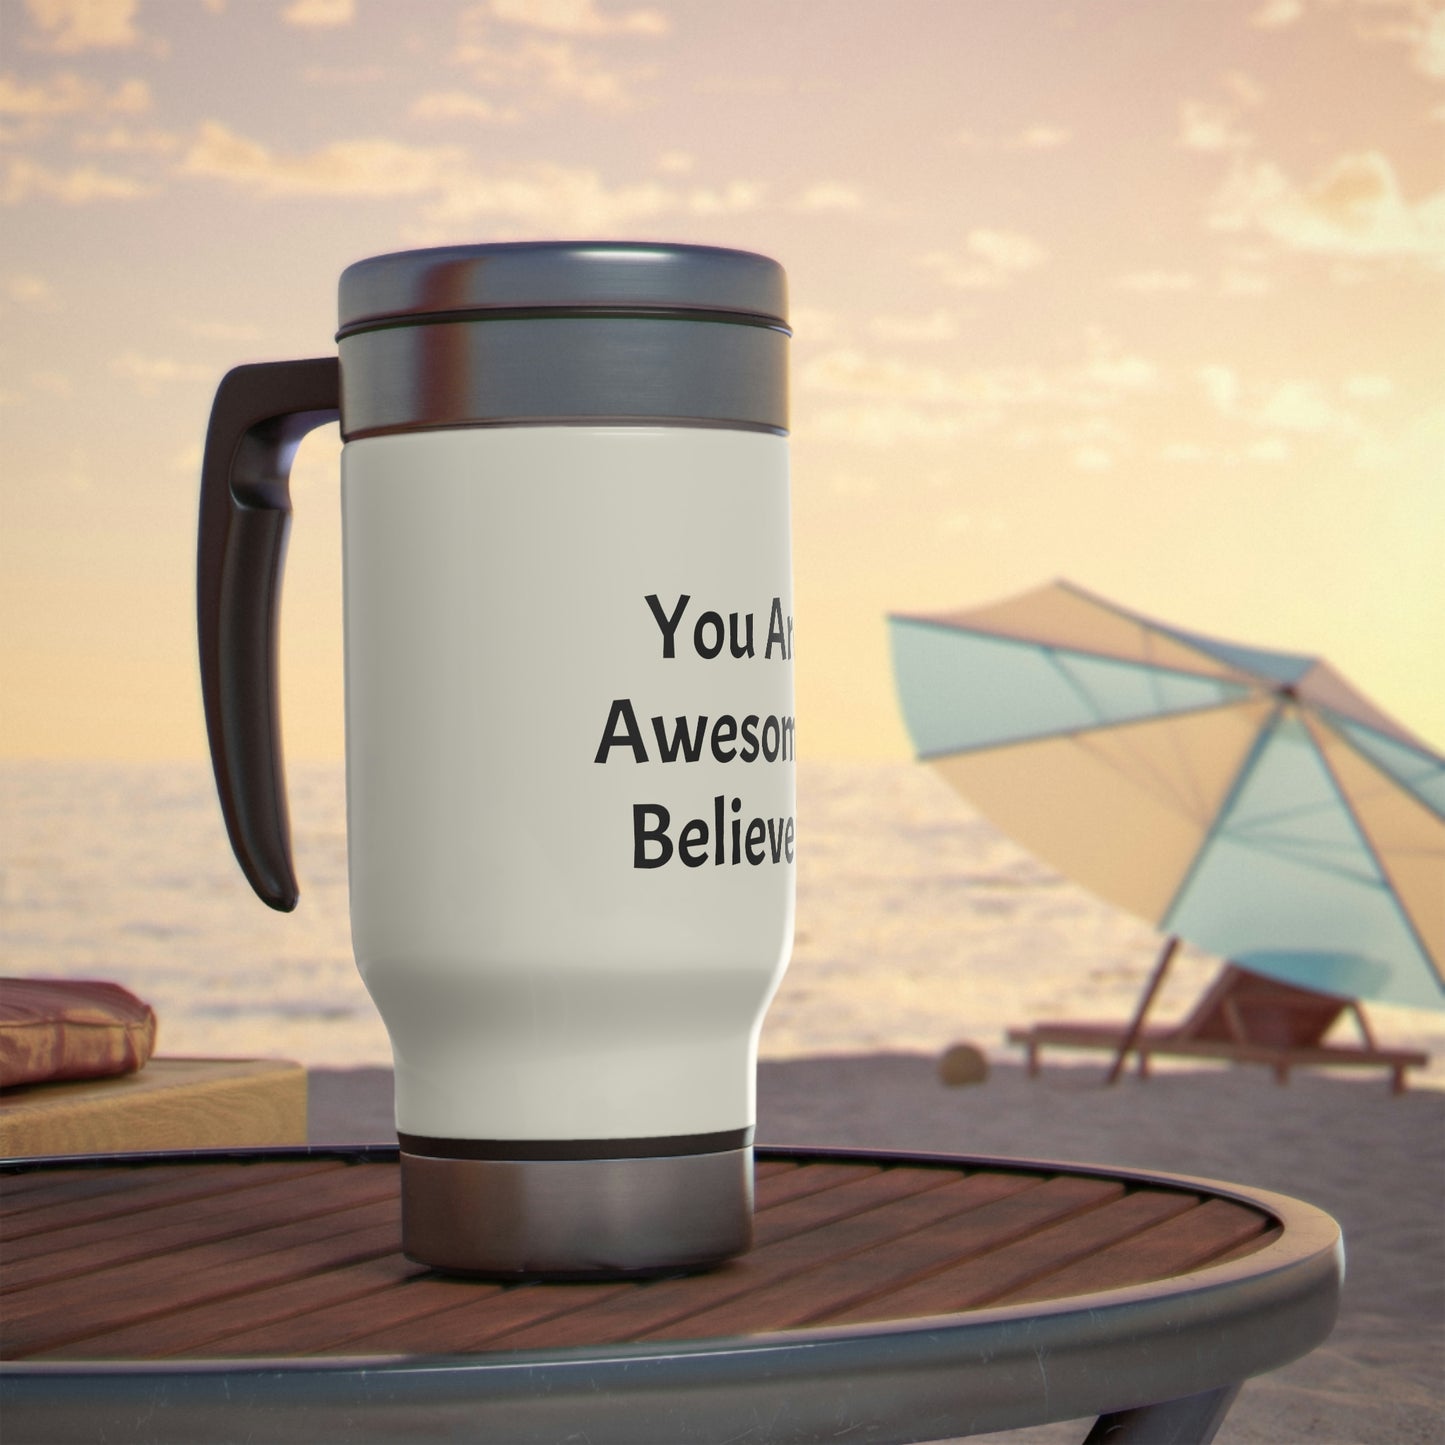 You Are Awesome! Stainless Steel Travel Mug with Handle, 14oz